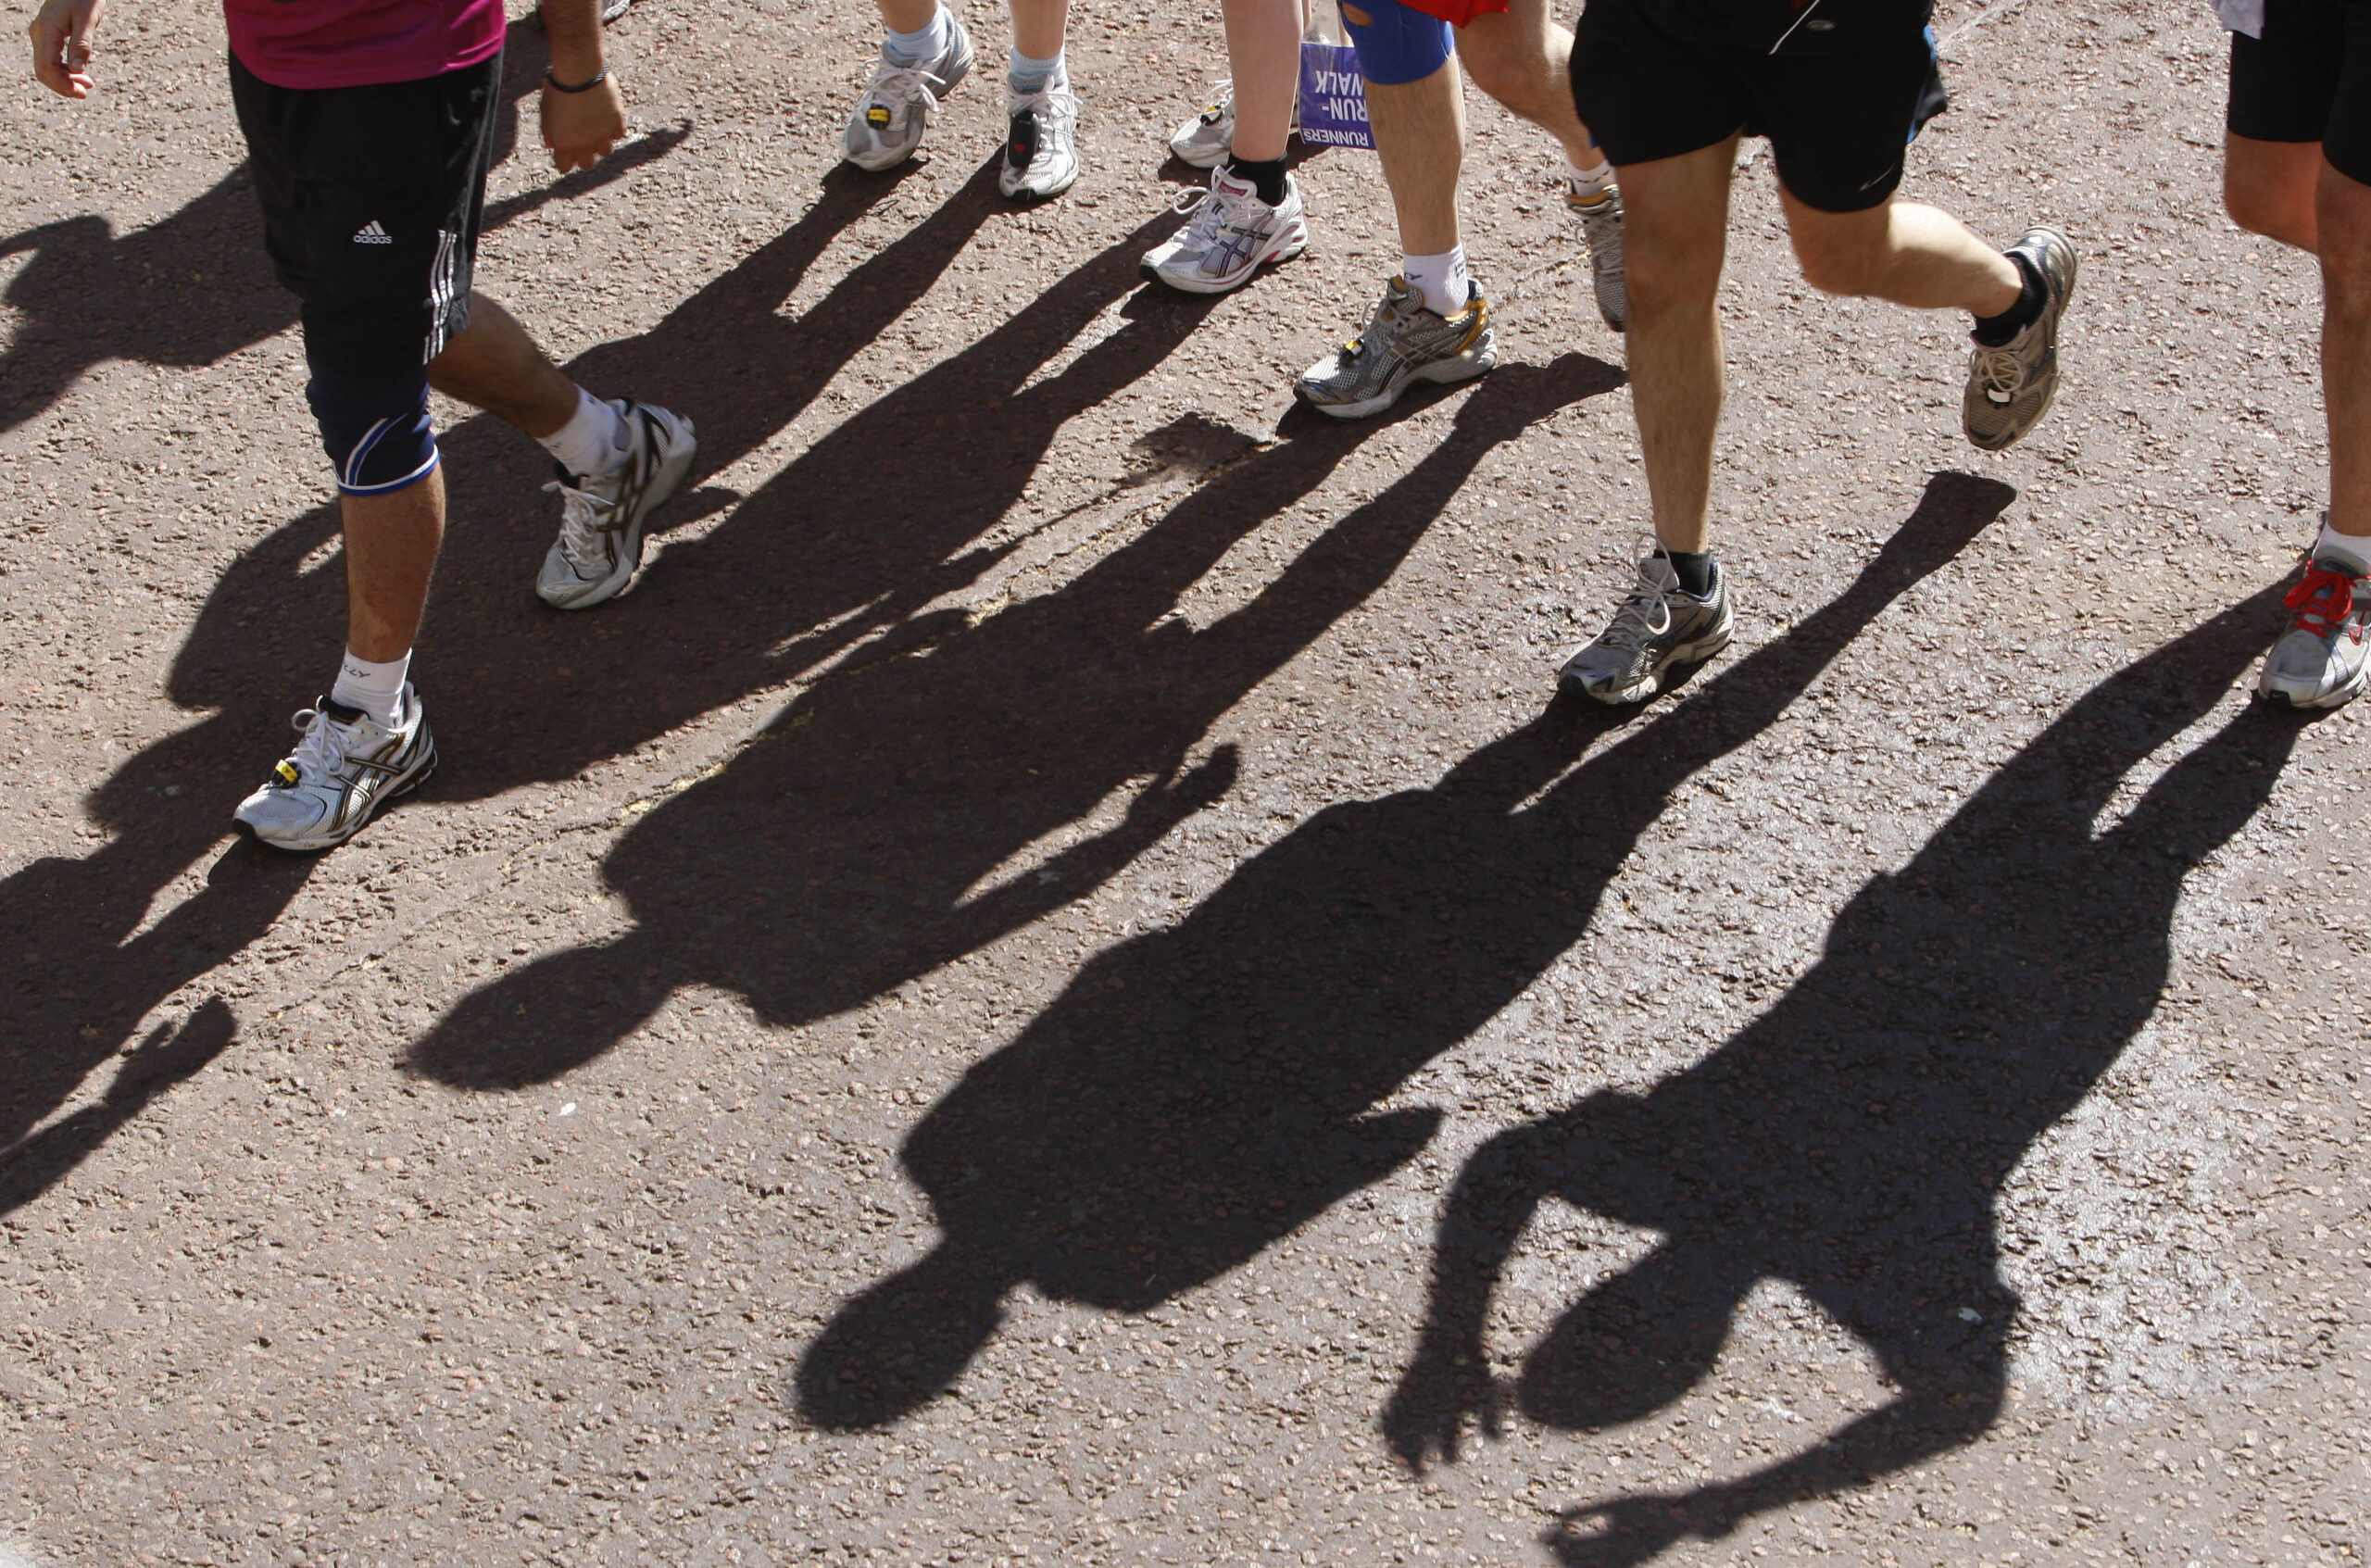 Only the legs of a few runners are seen striking the pavement. Their shadows are also on the pavement.